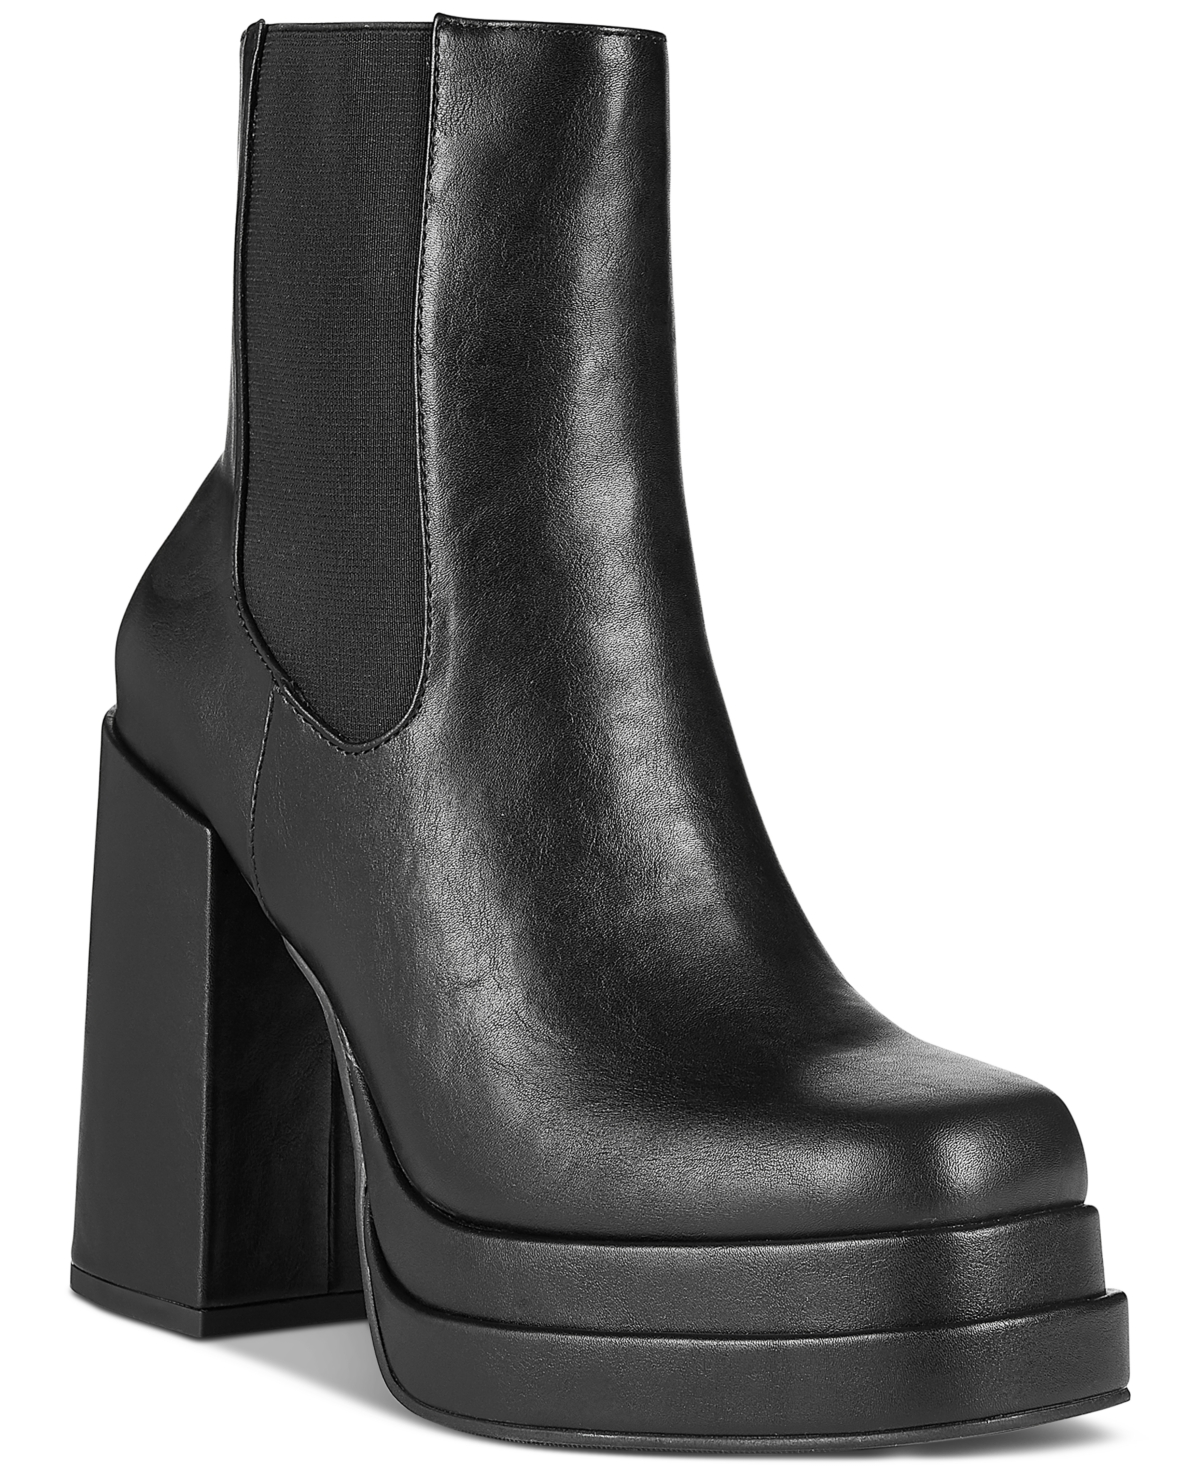 Ohara Double-Platform Booties, Created for Macy's - Black Smooth